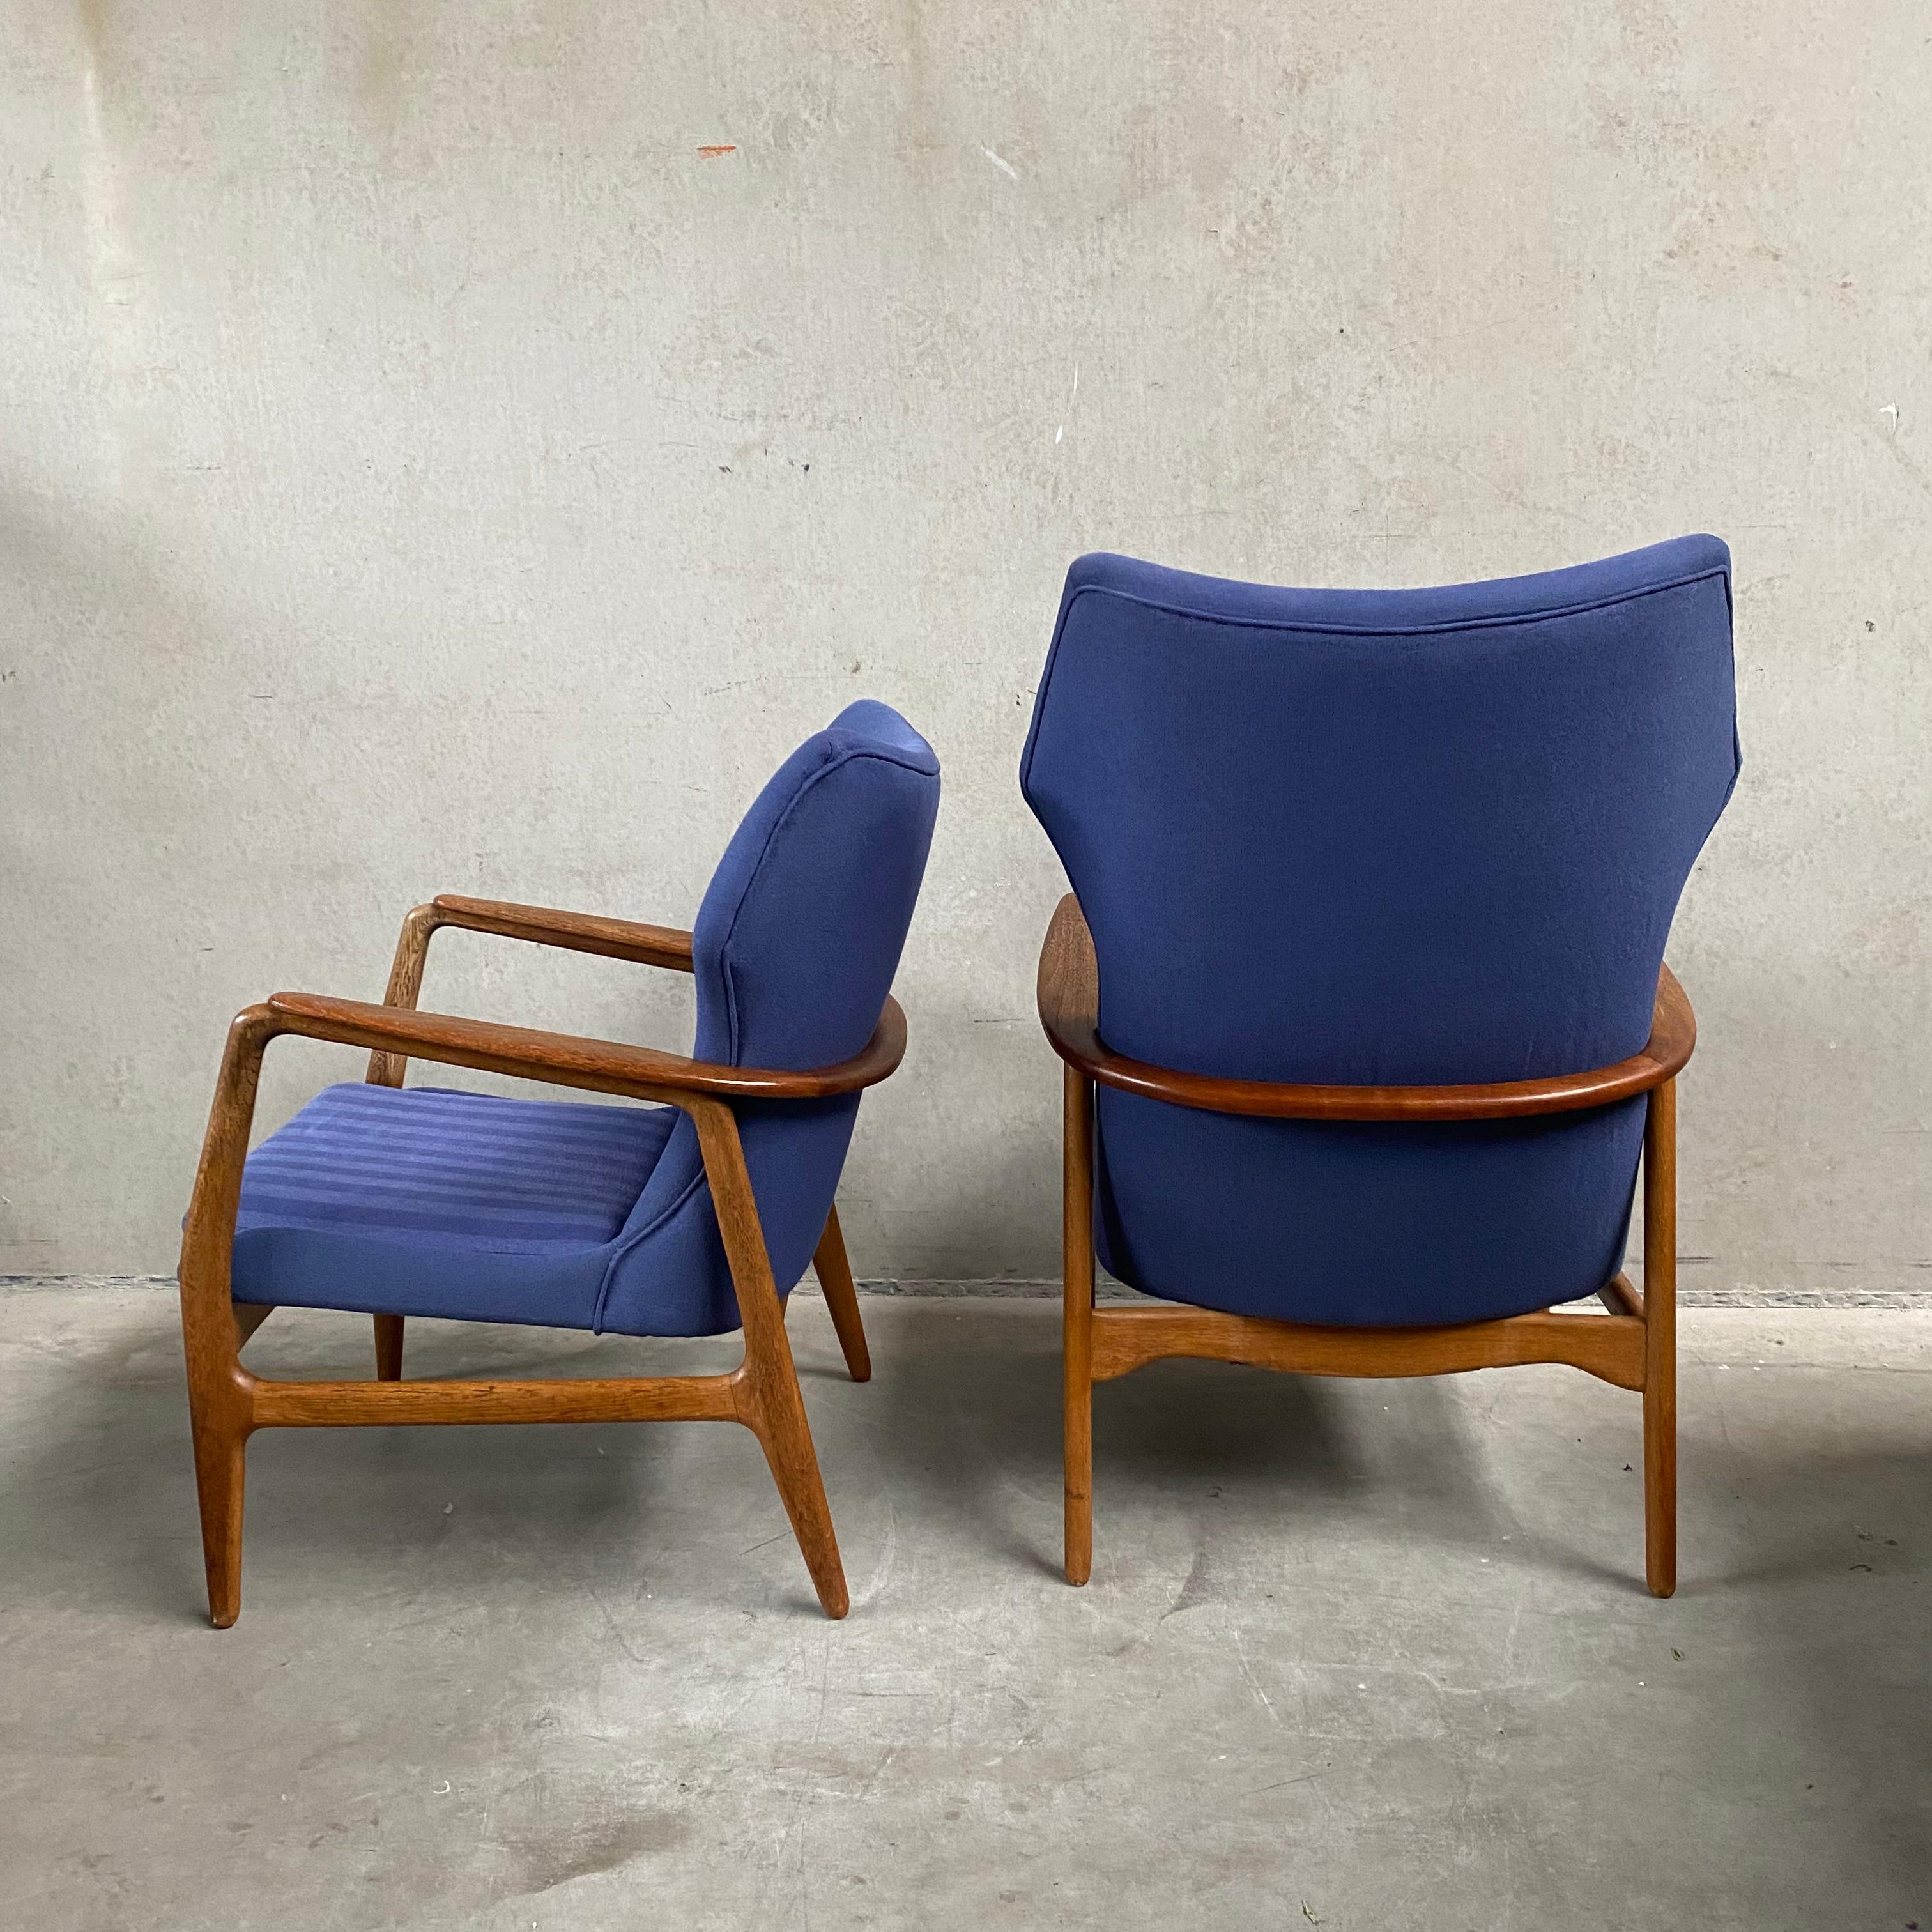 PAIR OF ARNOLD MADSEN & HENRY SCHUBELL LOUNGE CHAIRS FOR BOVENKAMP, NETHERLANDS 1950S

If you're looking for a timeless piece of mid-century furniture to add to your home, look no further than this stunning vintage pair of Arnold Madsen & Henry